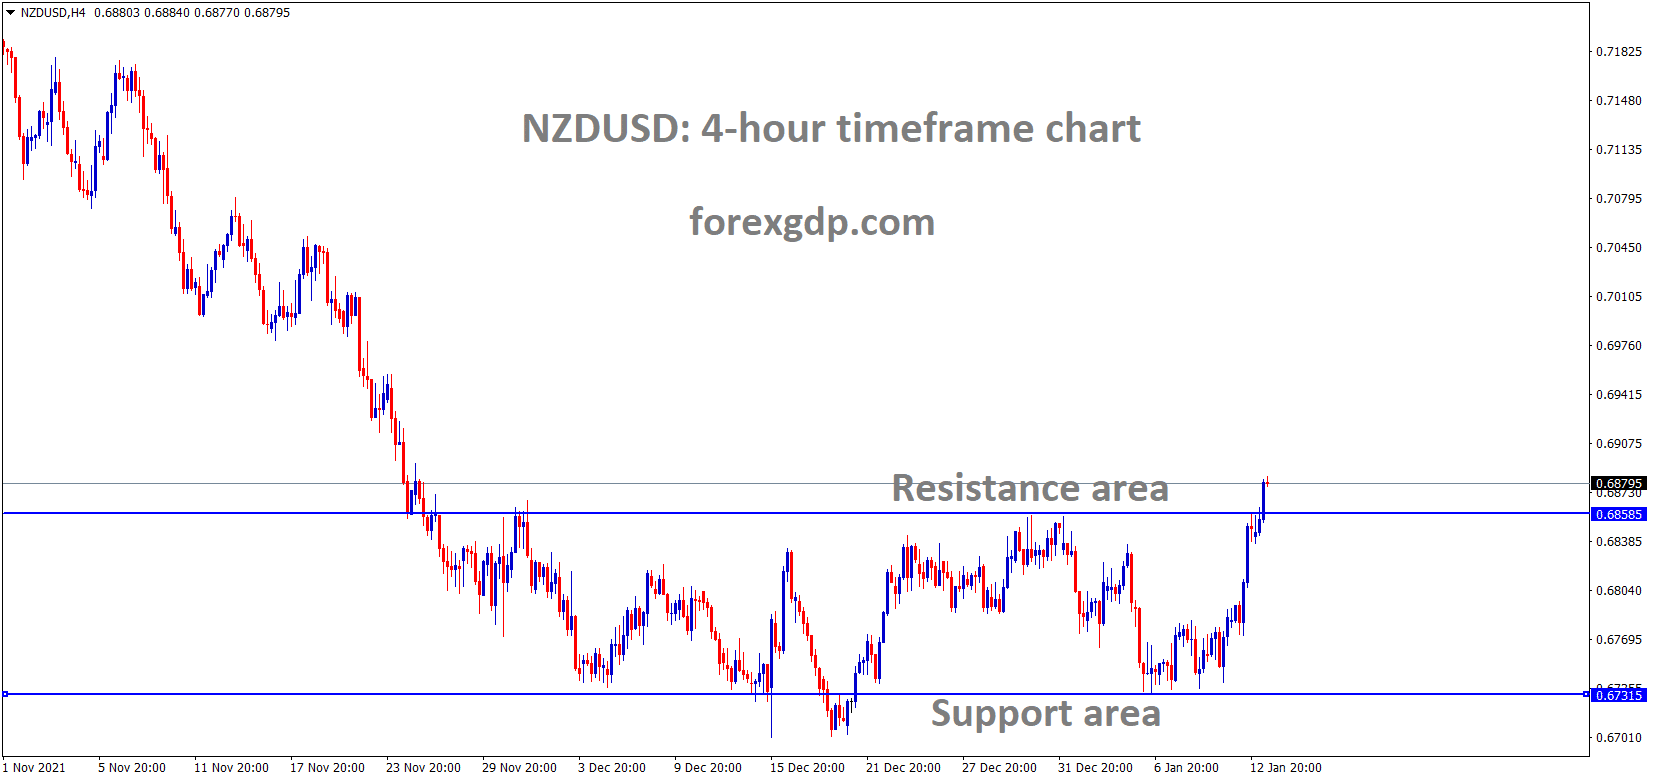 NZDUSD is moving in the Box Pattern and the market has reached the resistance area of the Box Pattern